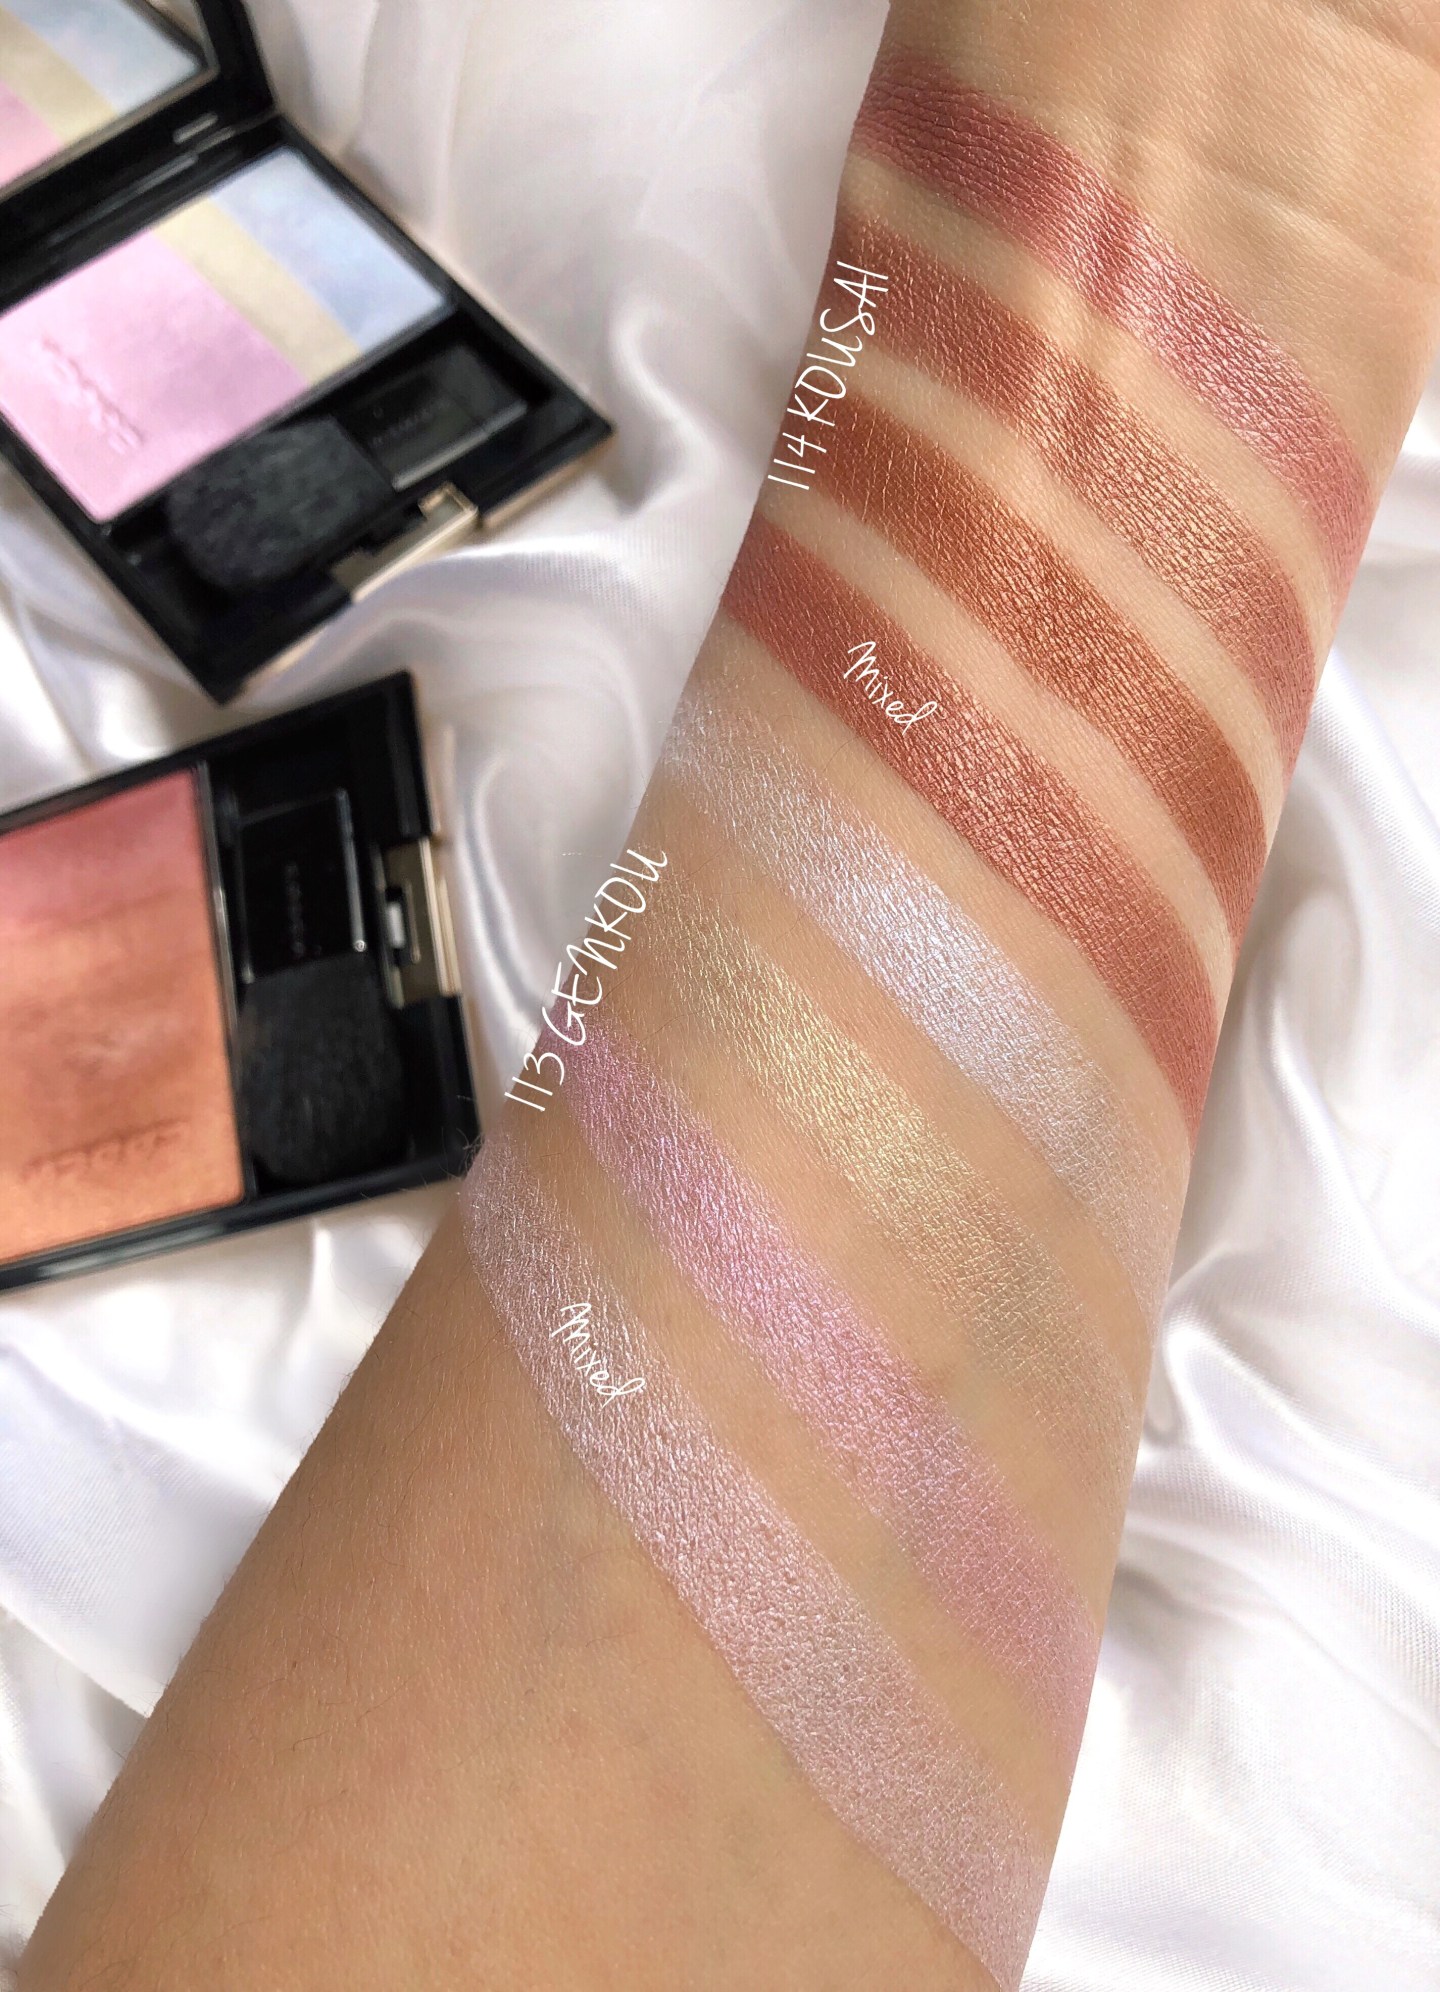 SUQQU Pure Color Blushes 113 and 114 swatches - SUQQU Pure Colour Blush 2019 Exclusive to Selfridges